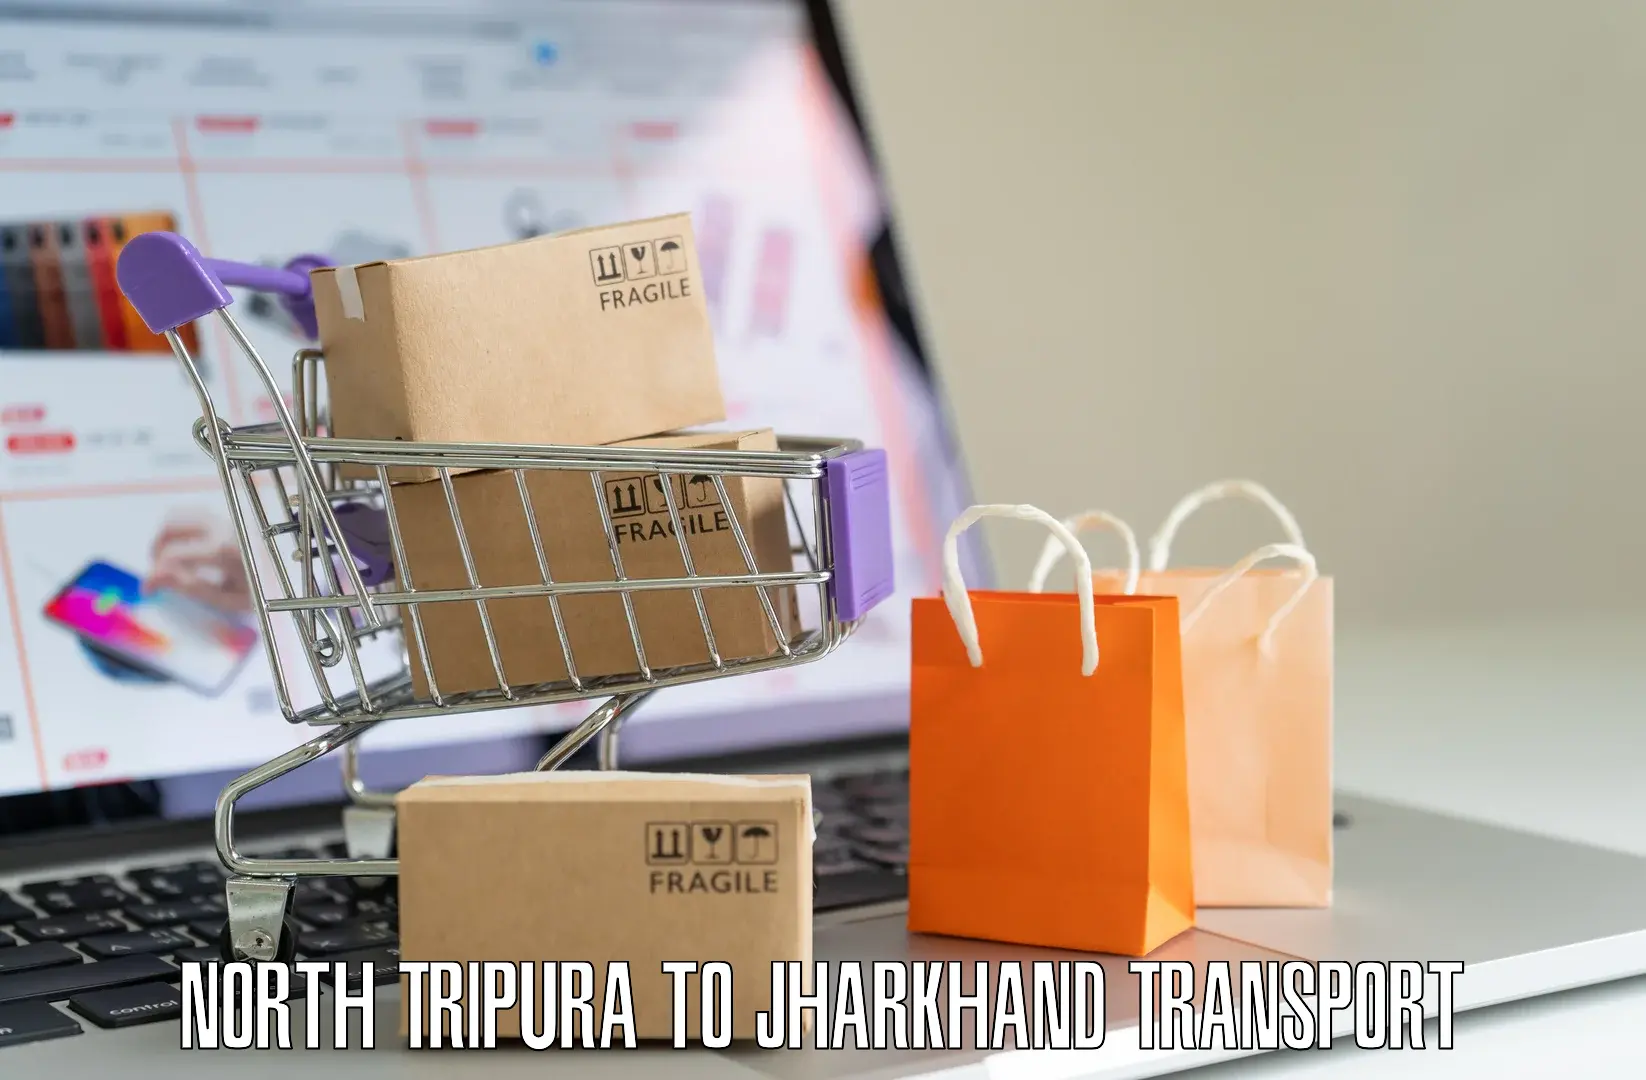 Vehicle parcel service North Tripura to Jharkhand